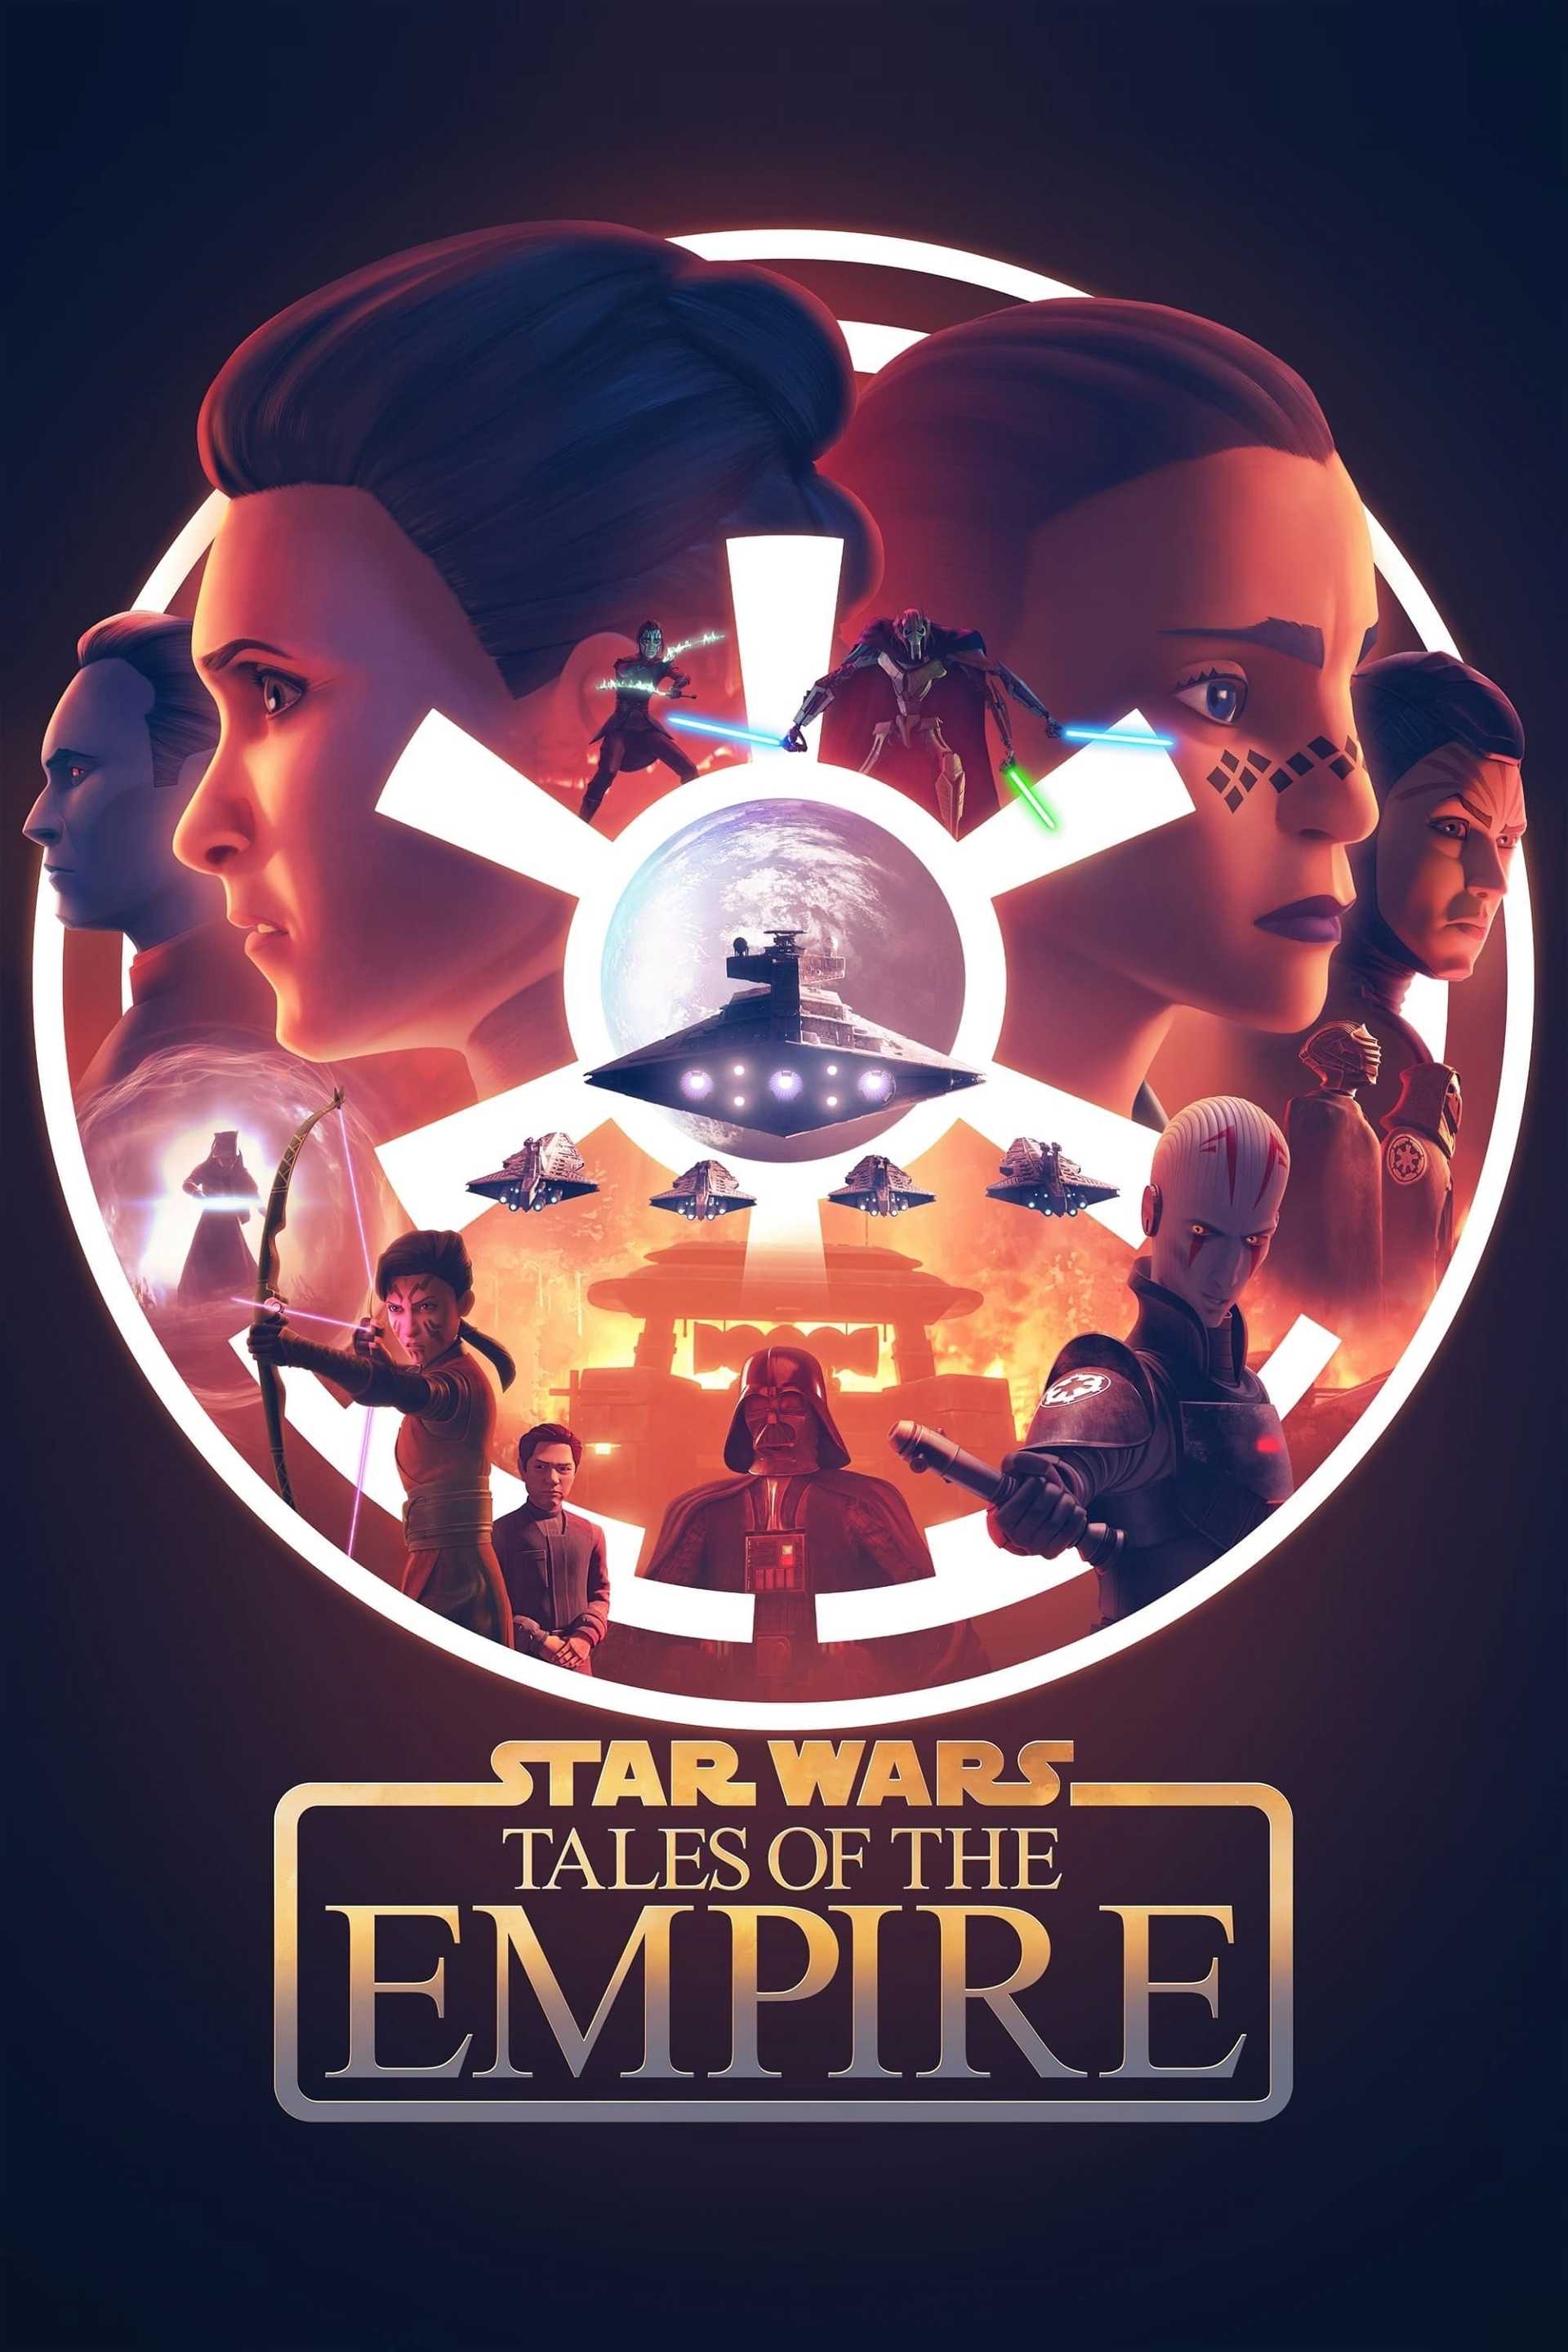 Star Wars - Tales of the Empire in streaming